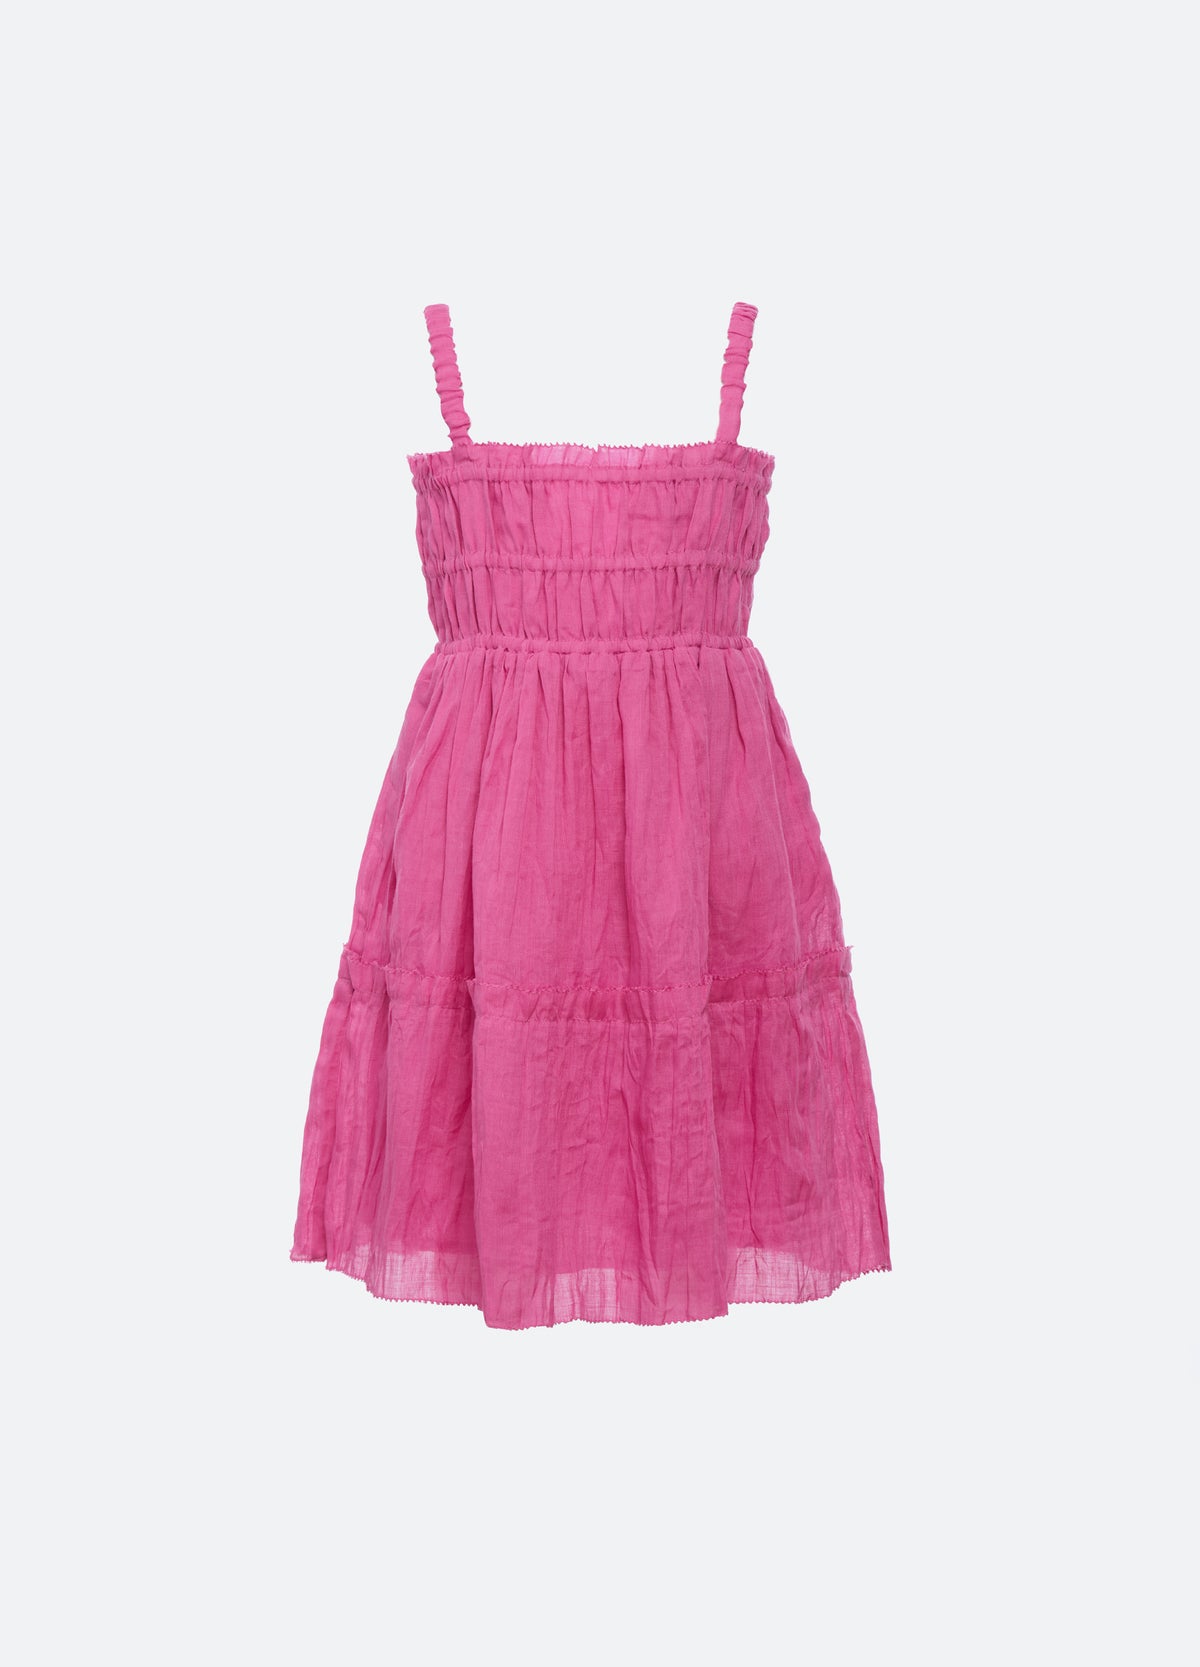 pink-cole kids dress-front view